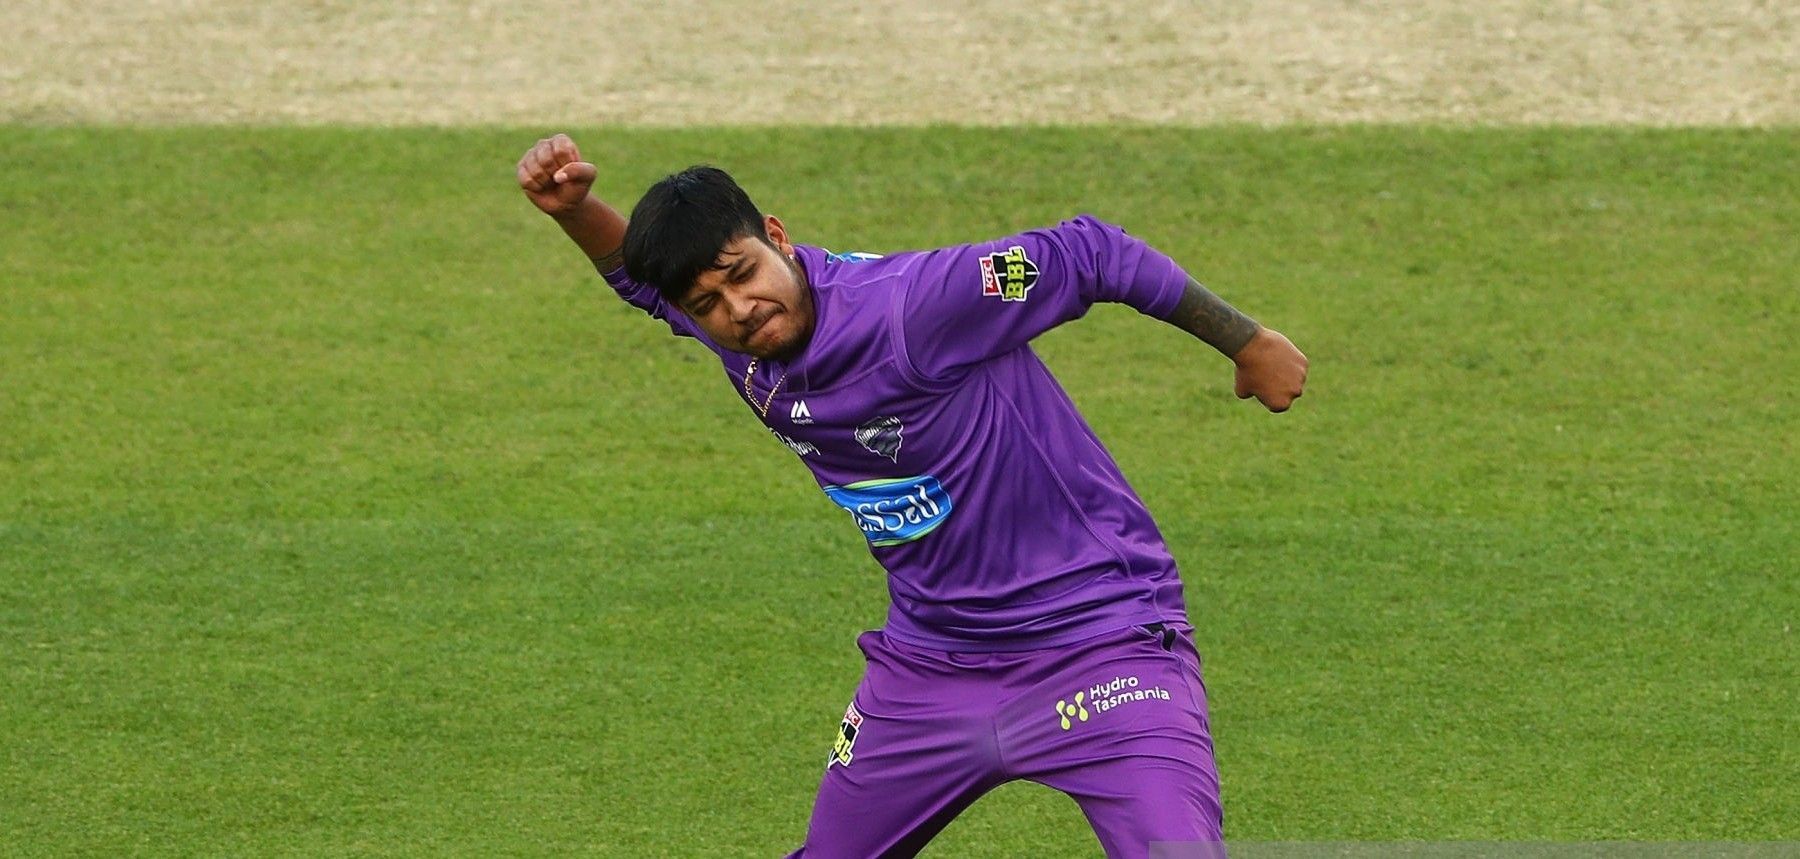 Sandeep Lamichhane, despite being jut 21 has already played in various T20 leagues